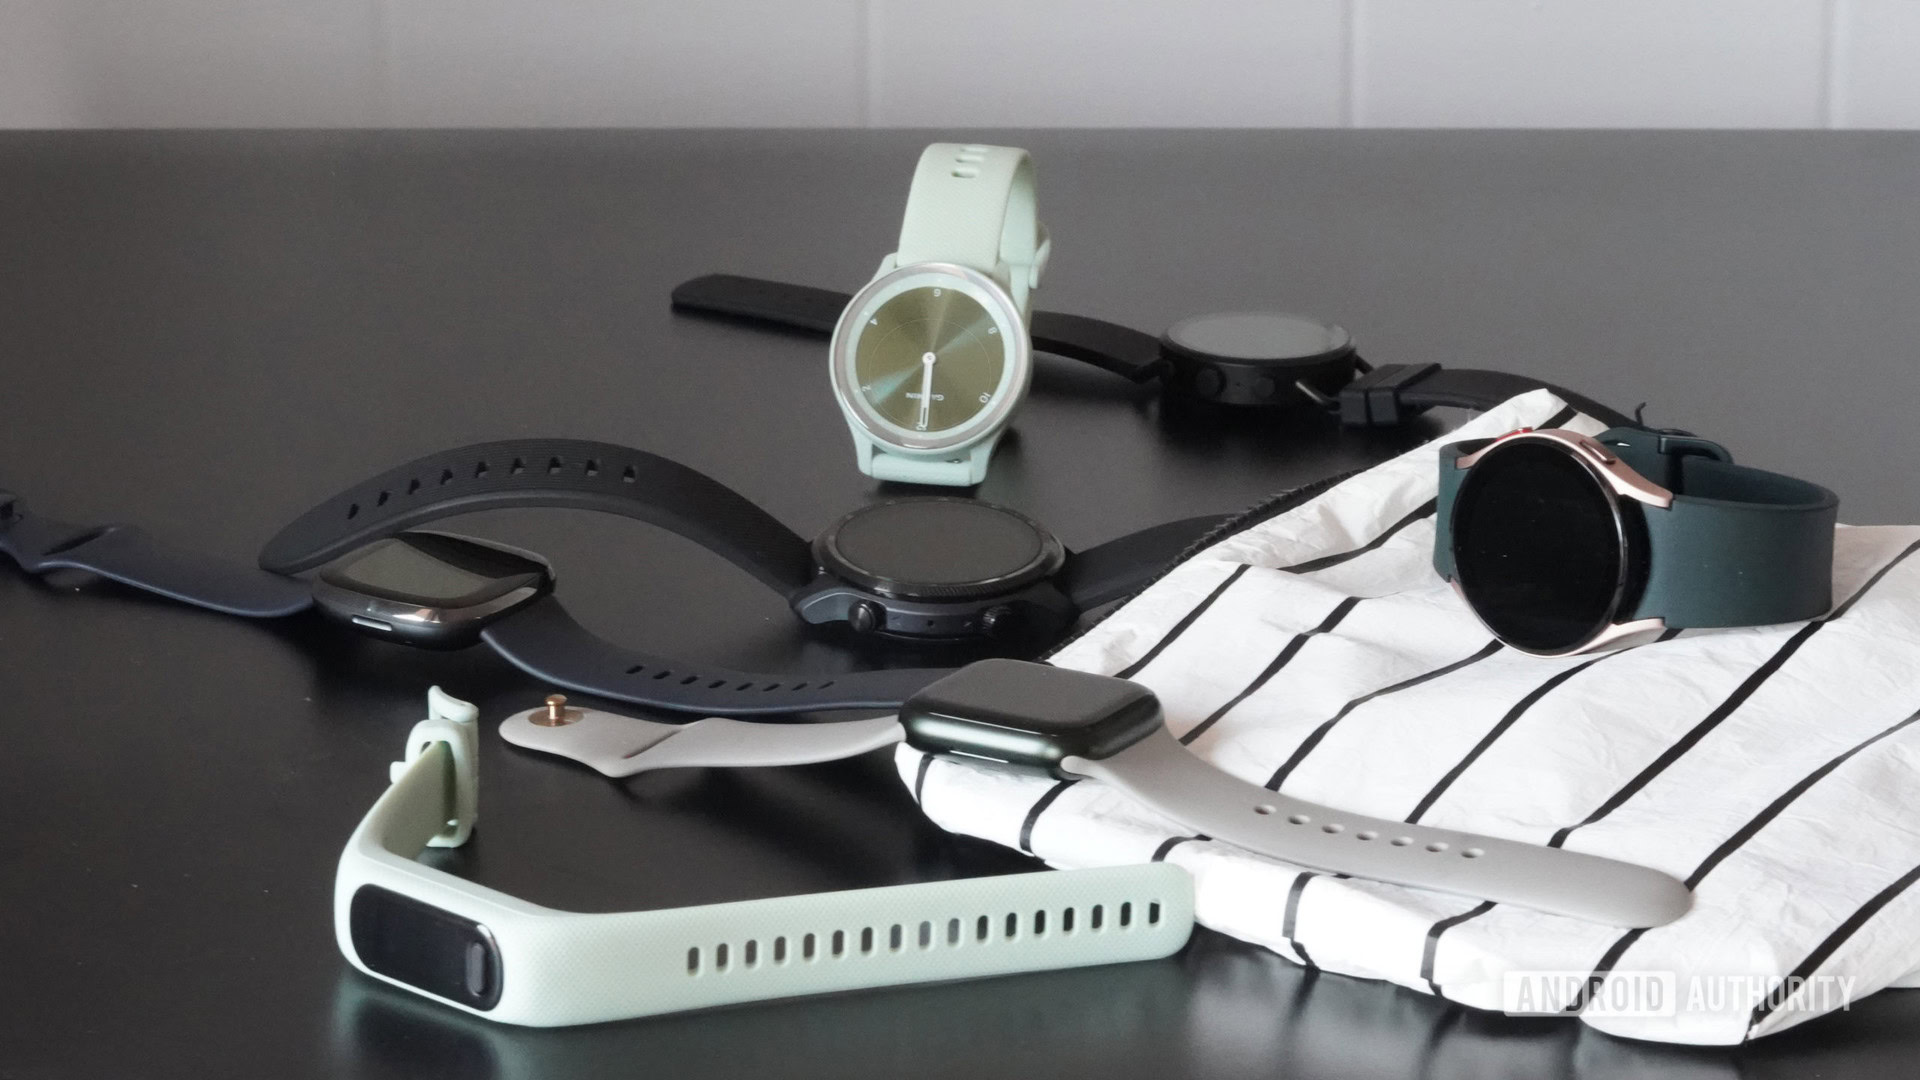 Mixed Bag Wearables scaled